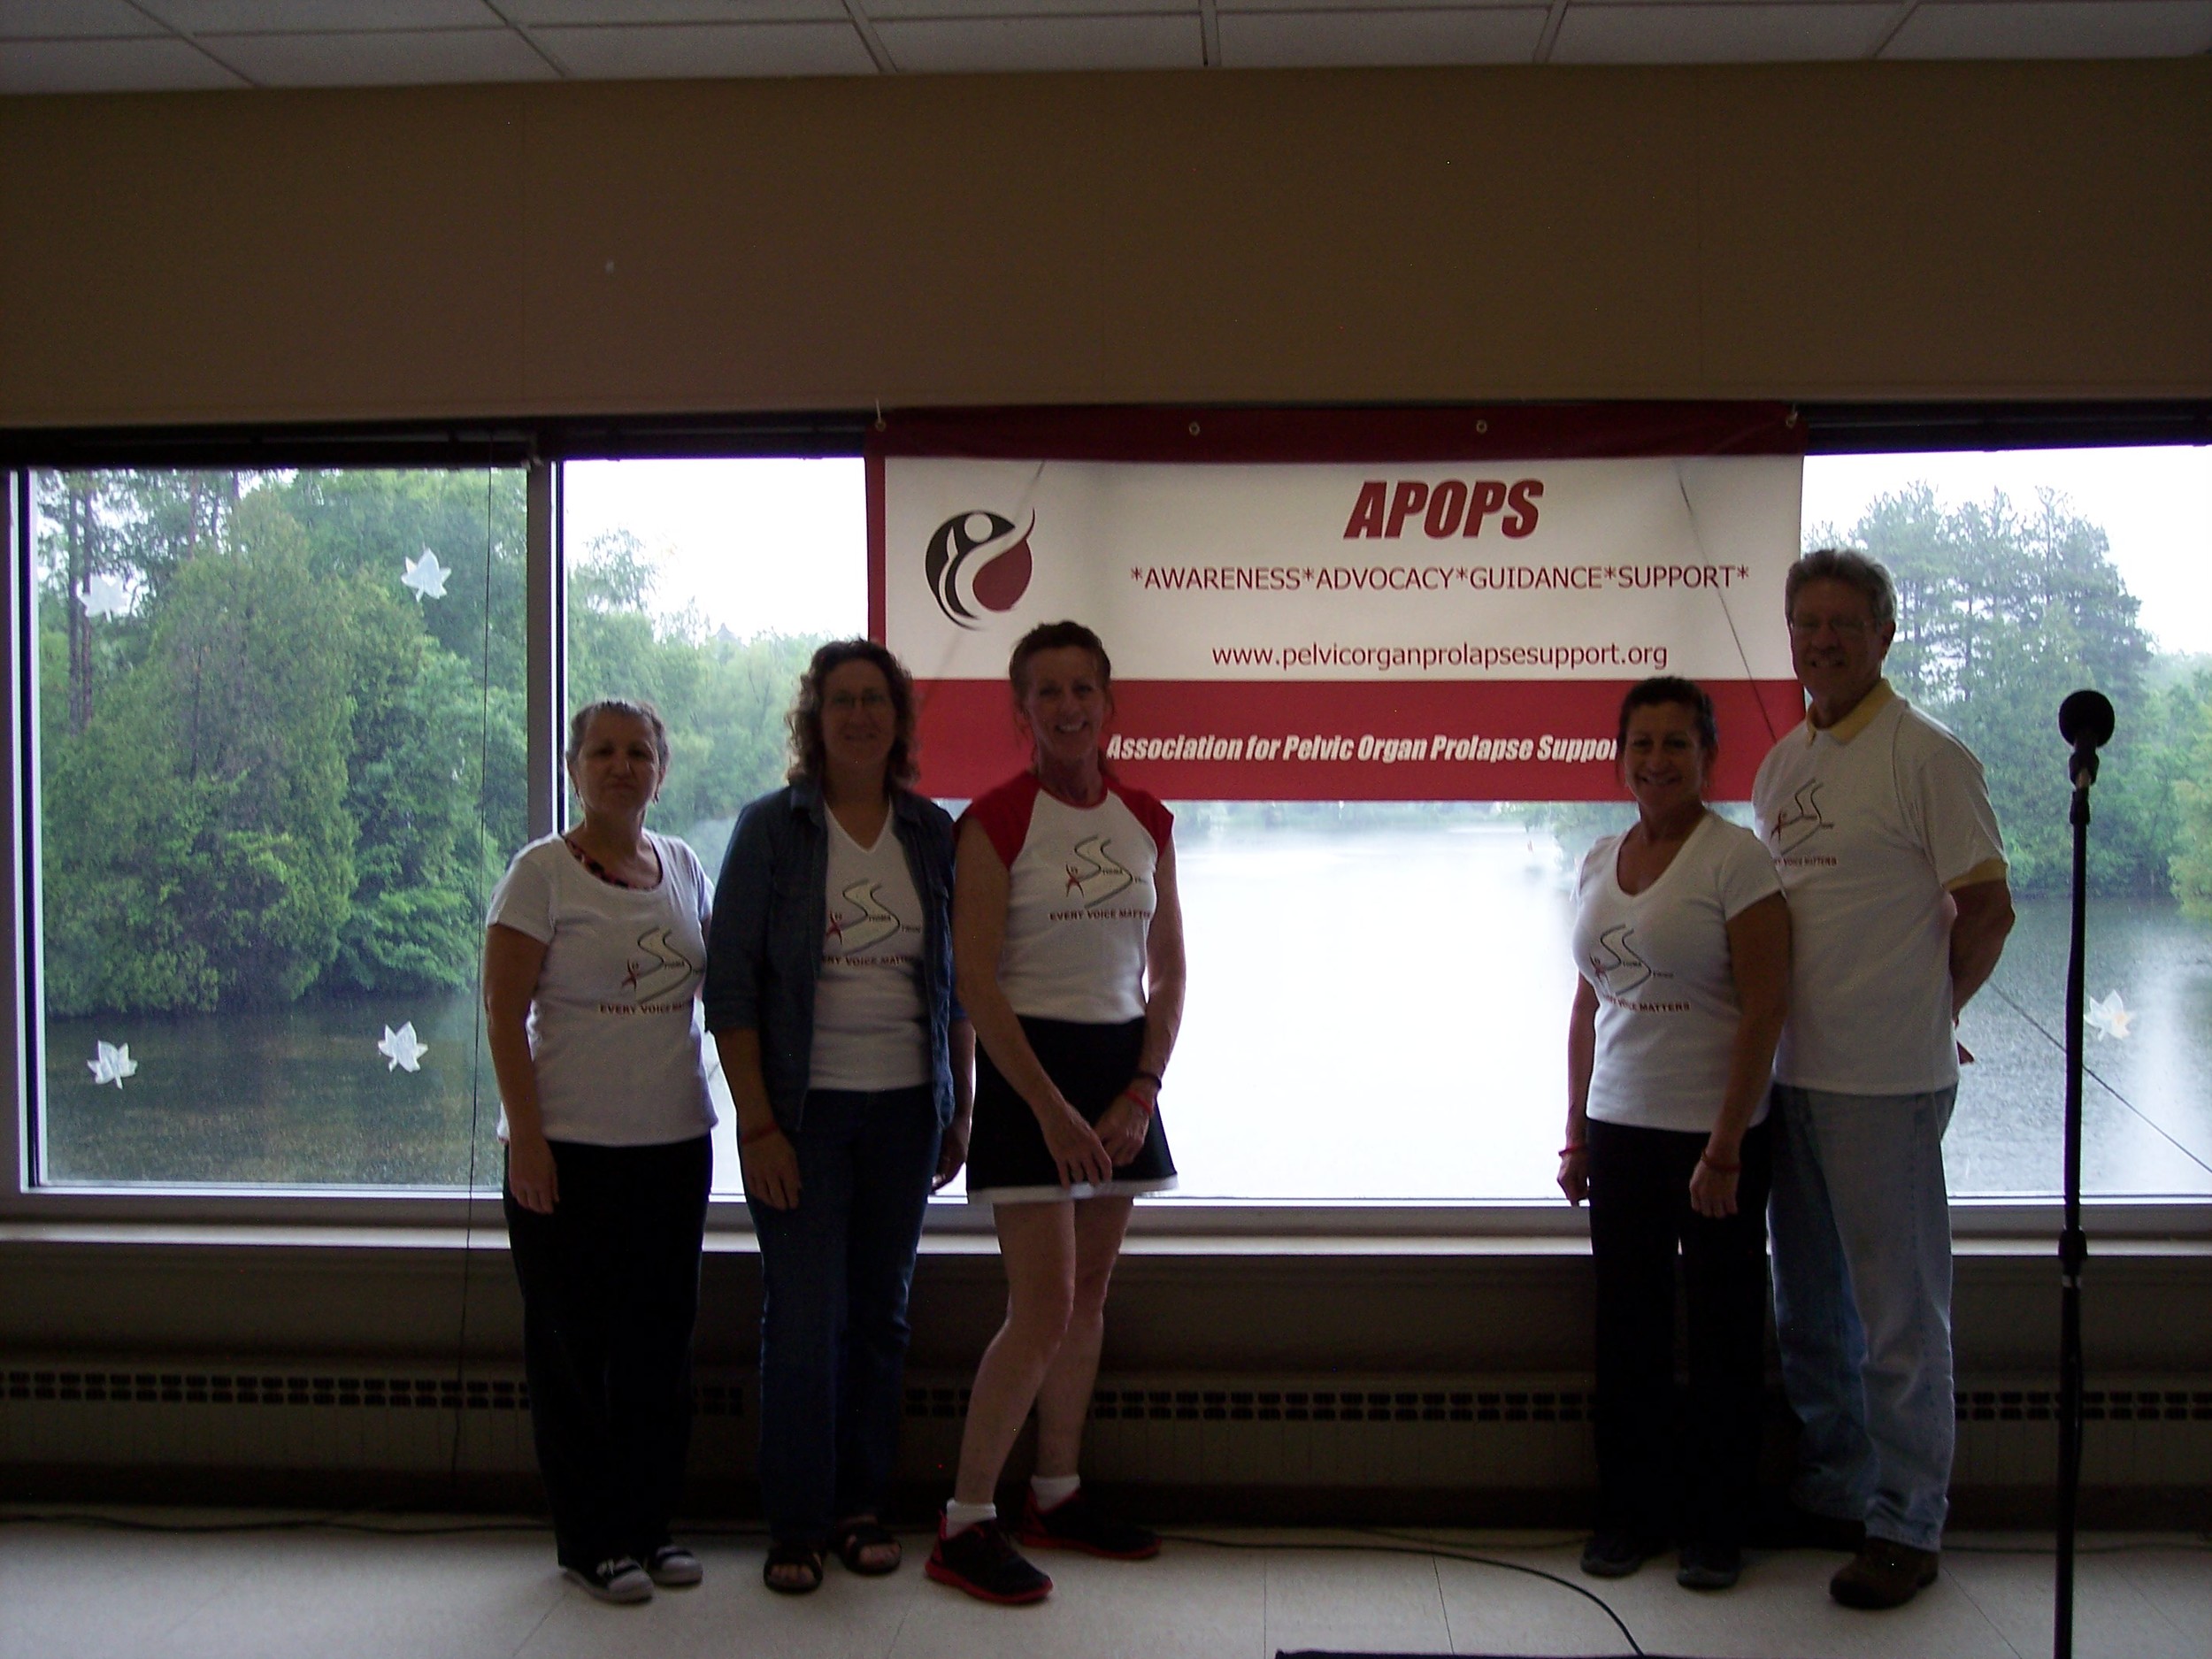 APOPS Board Members Susanne Vella, Wendy Vear-Hanson, APOPS Founder Sherrie Palm, Ruth Campos, and Board President Robert Lawn